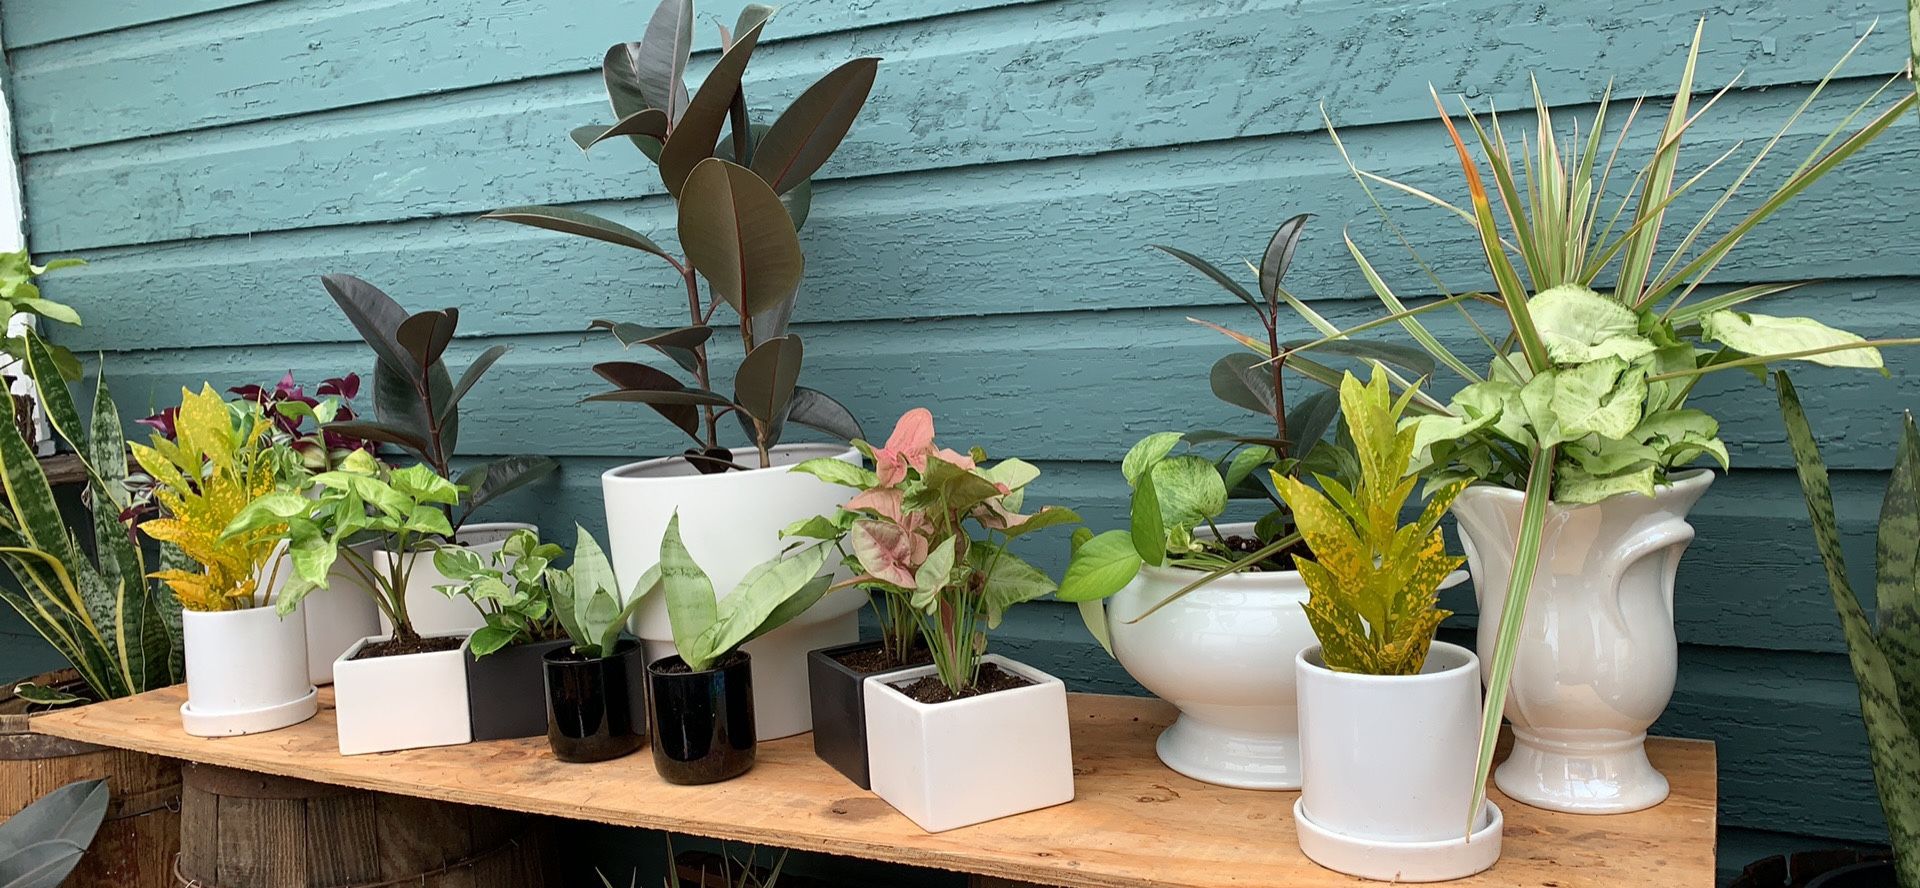 Houseplants - Potted, White Pot collection 